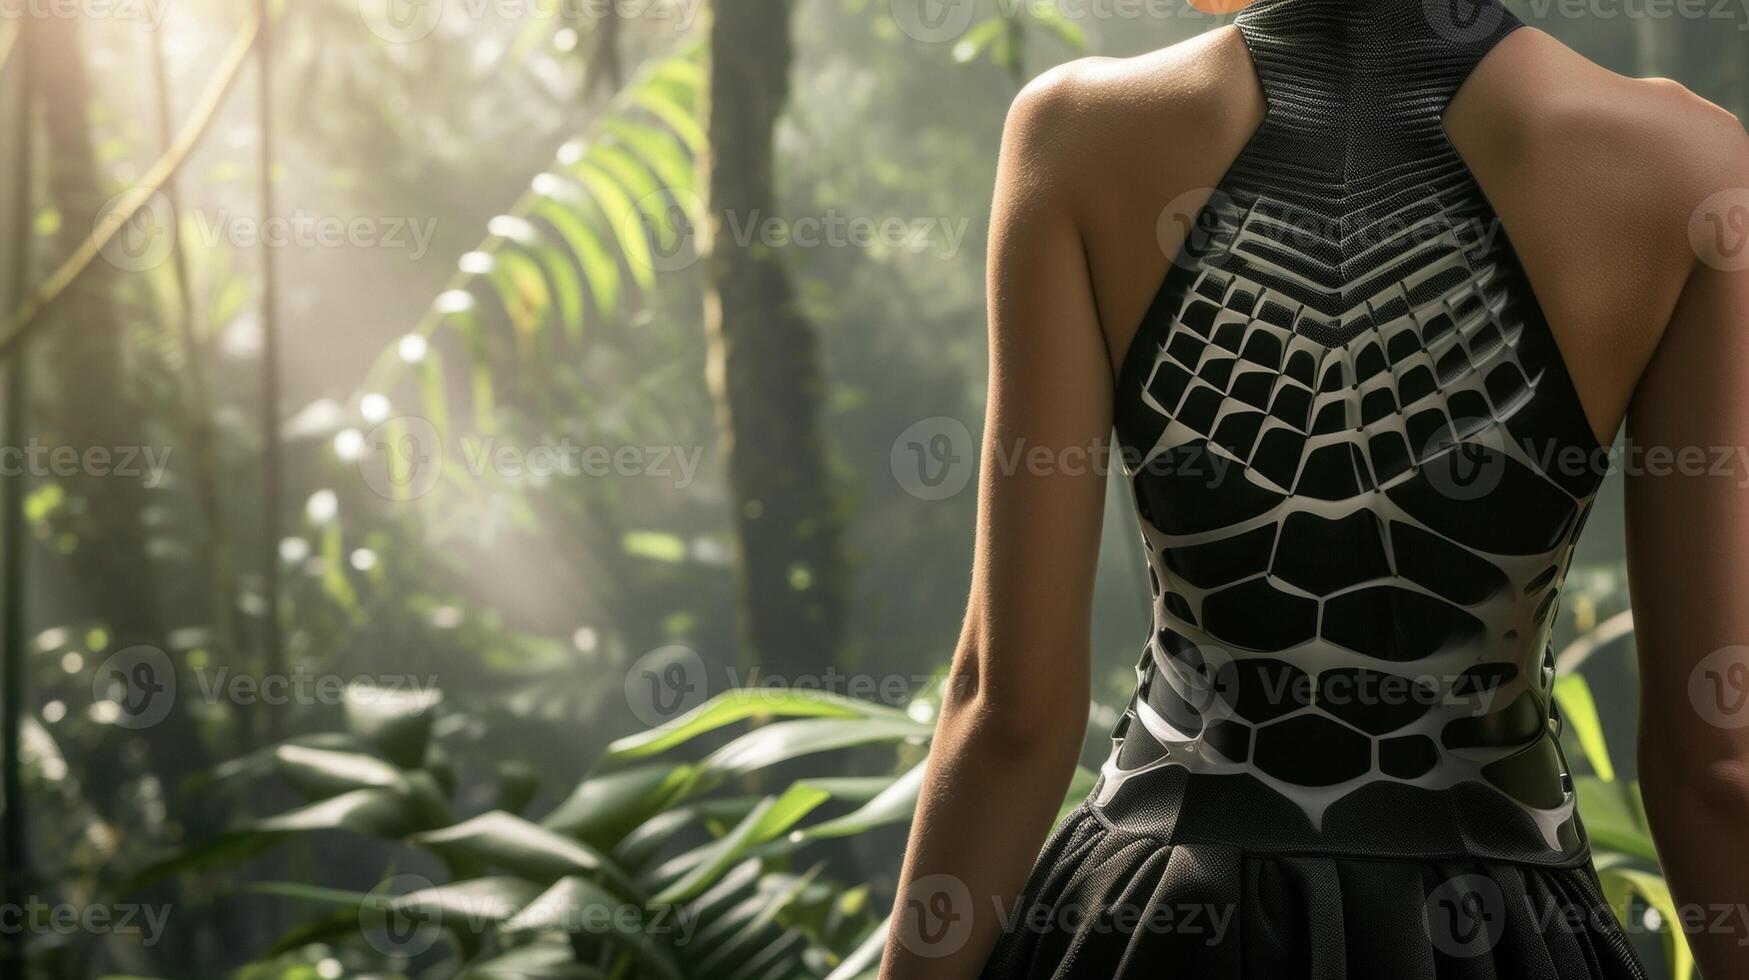 A sleek dress with 3D printed panels designed to adapt to different levels of humidity making it perfect for a day of outdoor exploration in a tropical rainforest photo